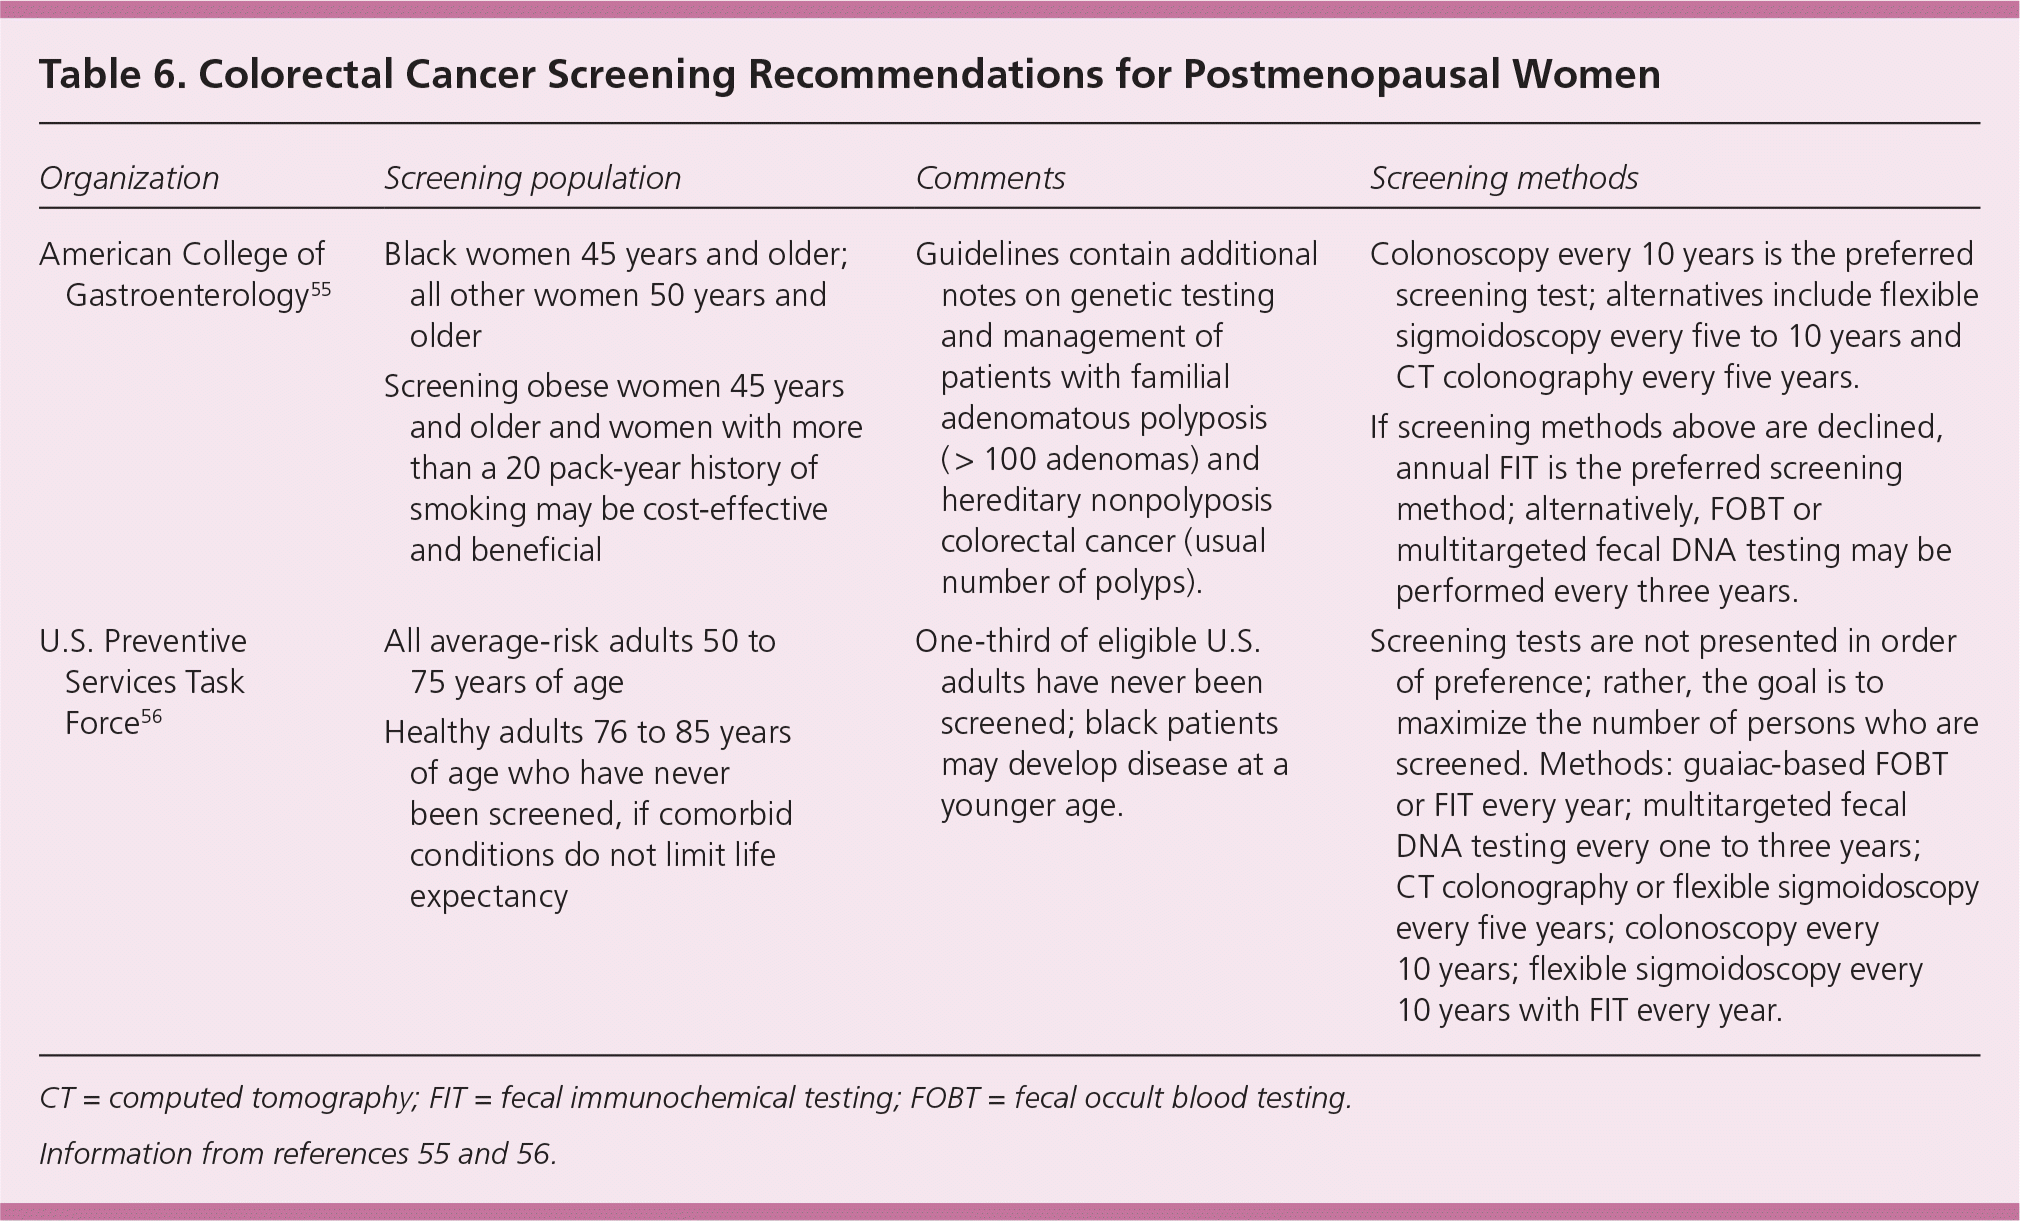 Foundation for Women's Cancer - Post-menopausal bleeding can be